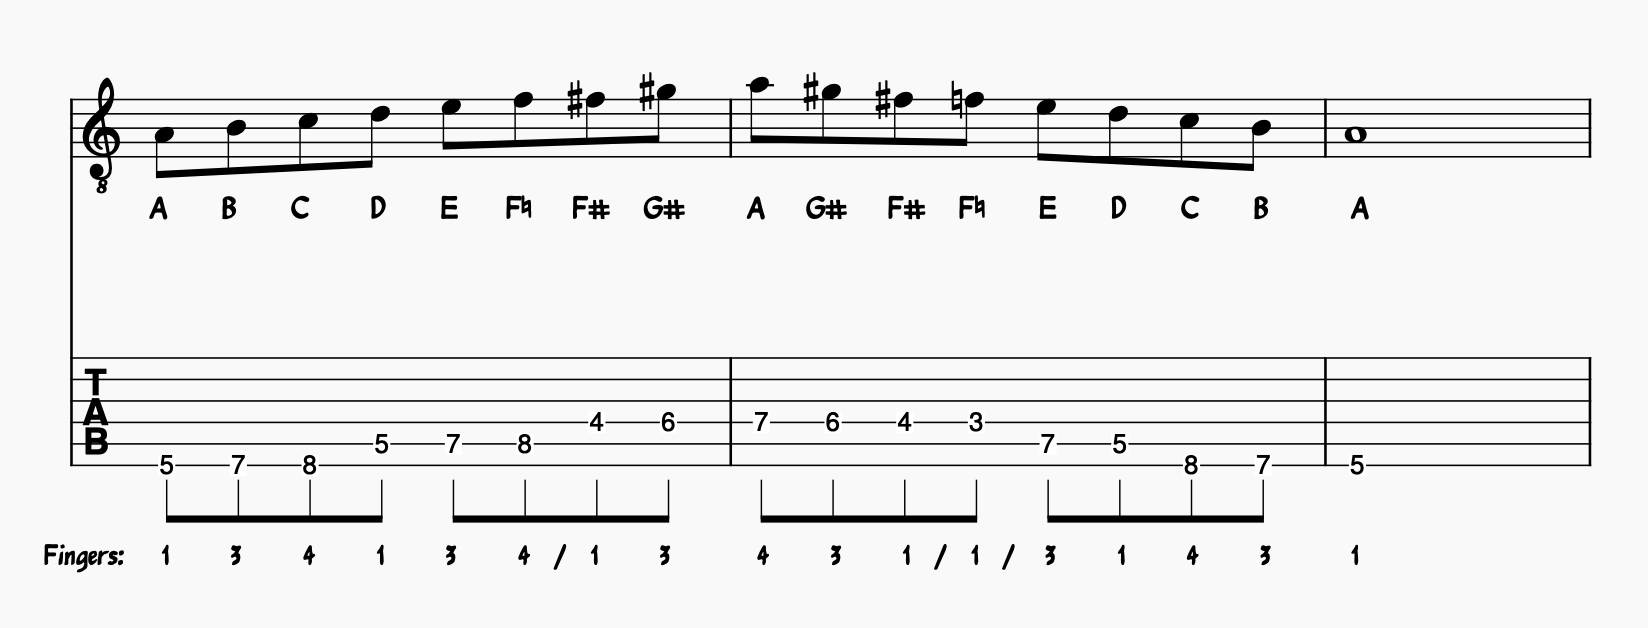 melodic minor bebop scale in A